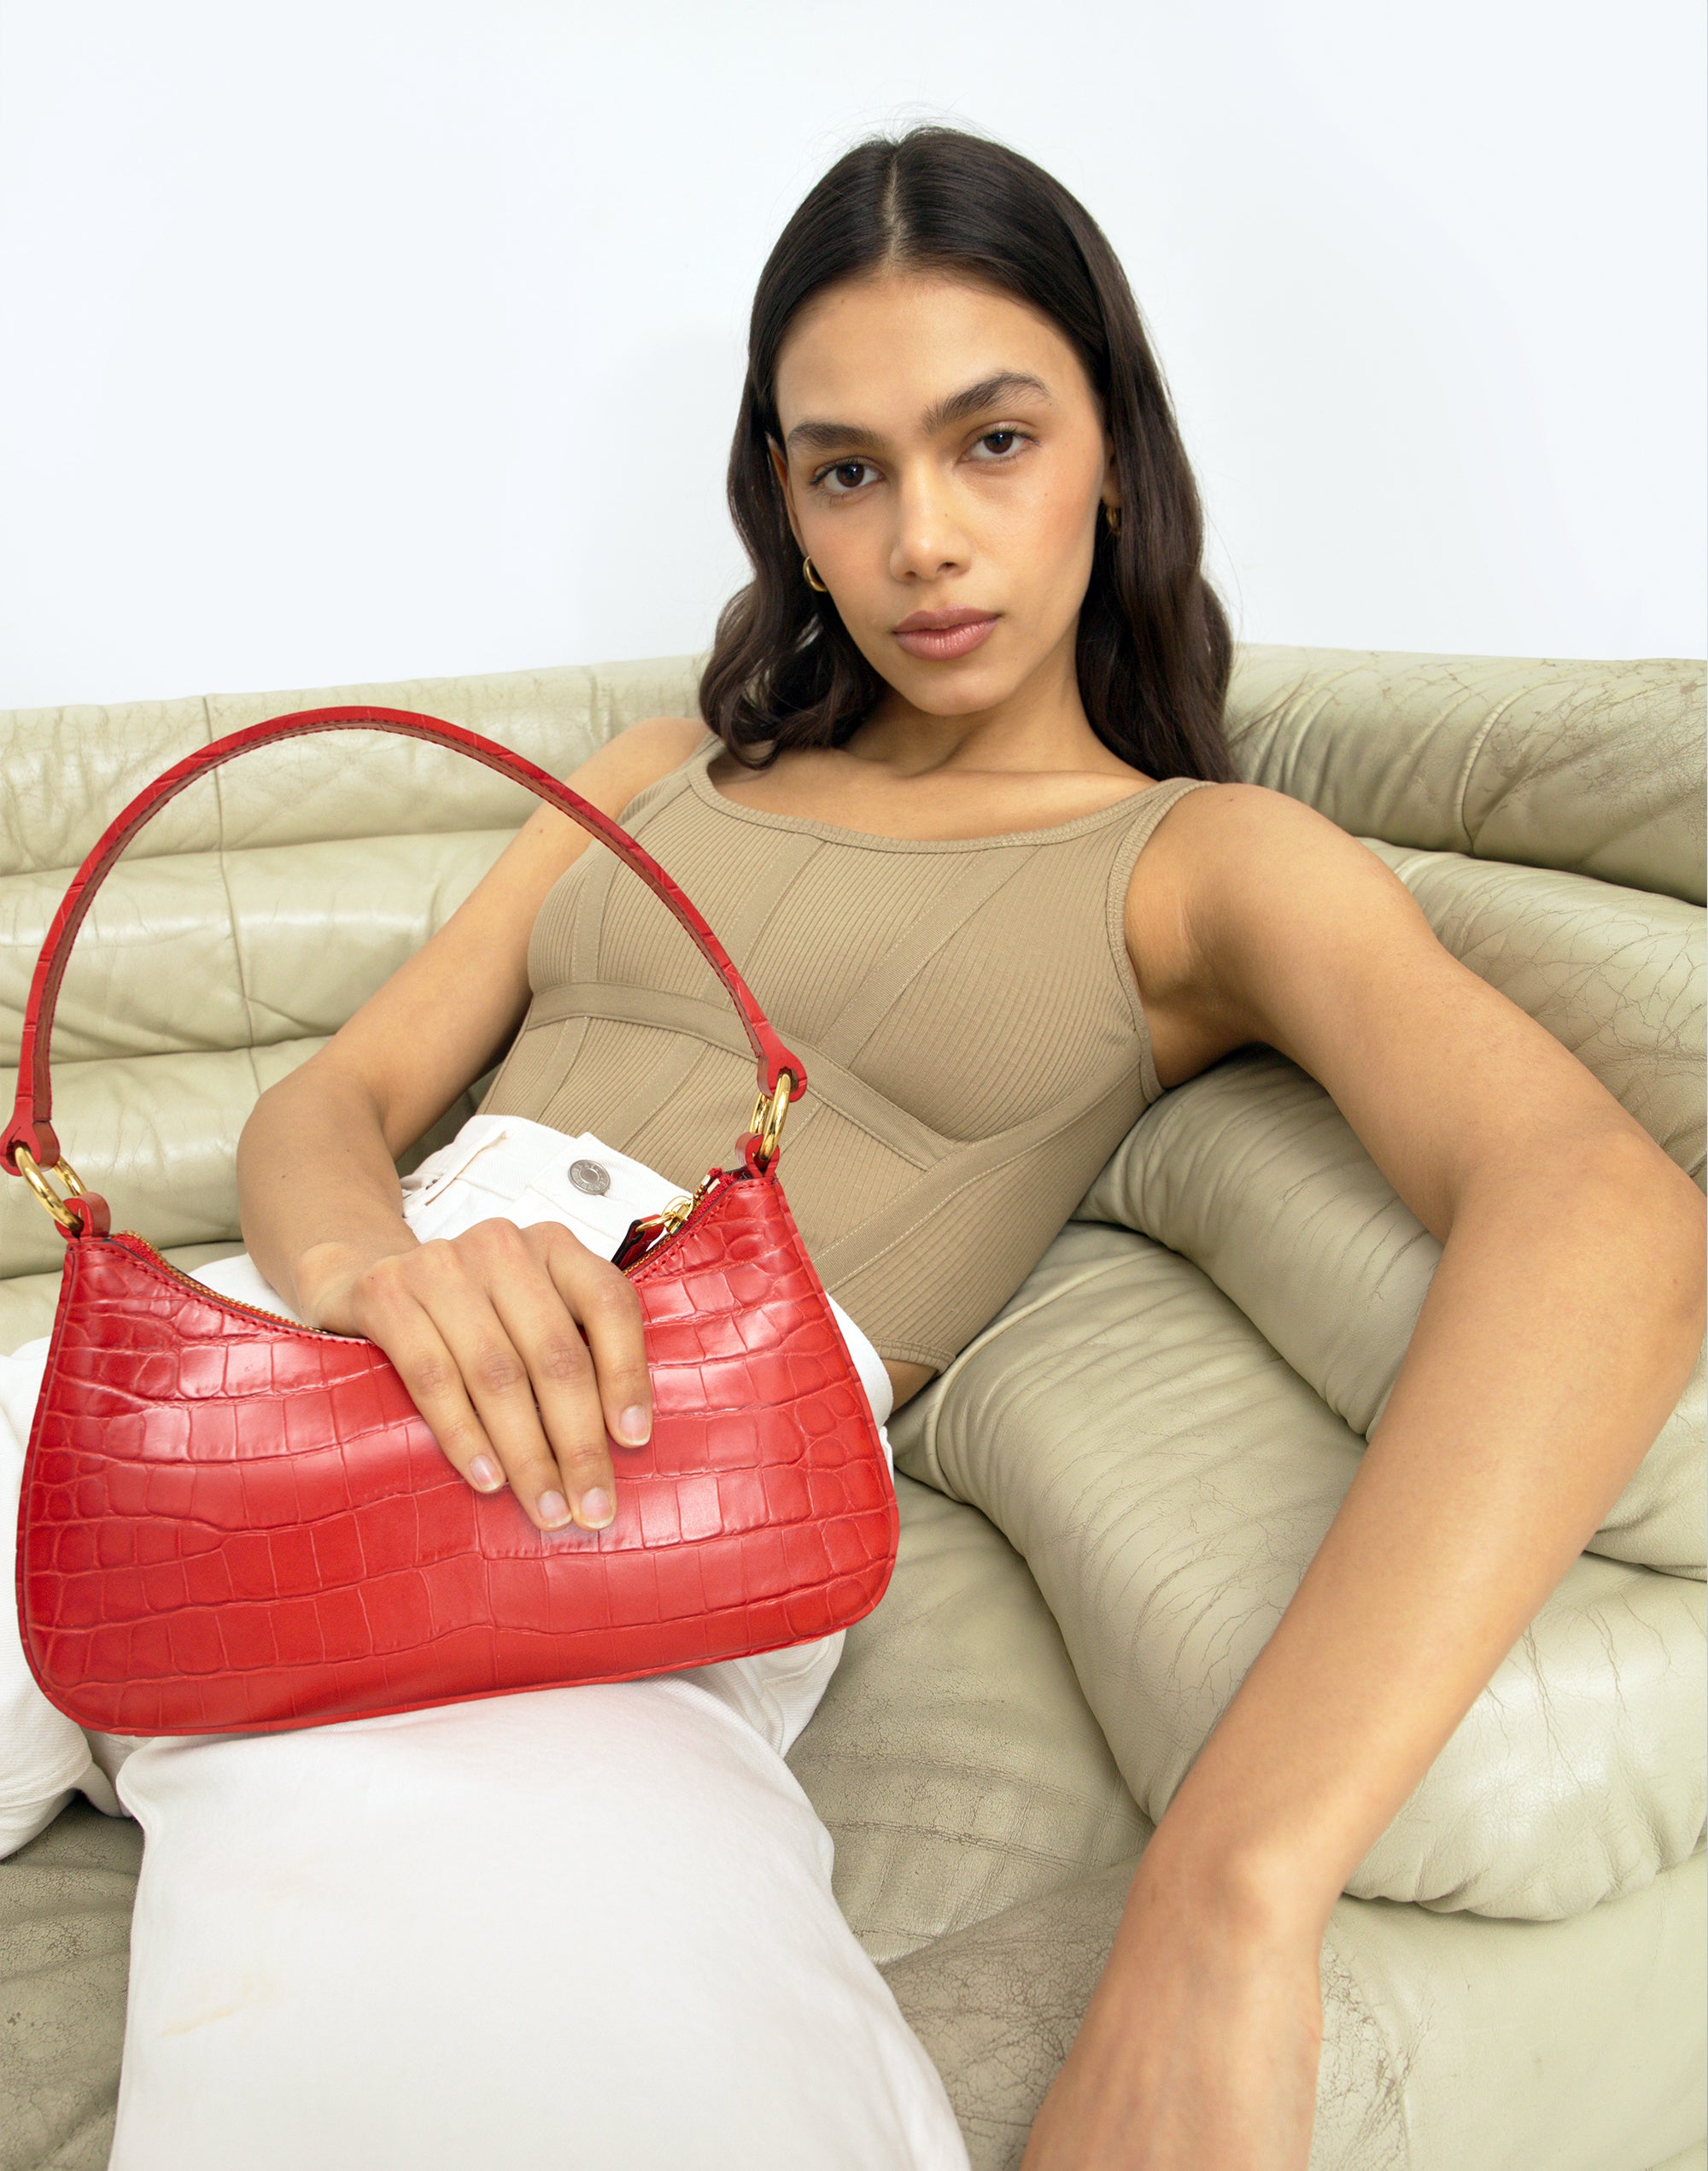 a woman lounging on a beige vintage chair wears a tan top, white pants and a bright red croc mini shoulder bag.